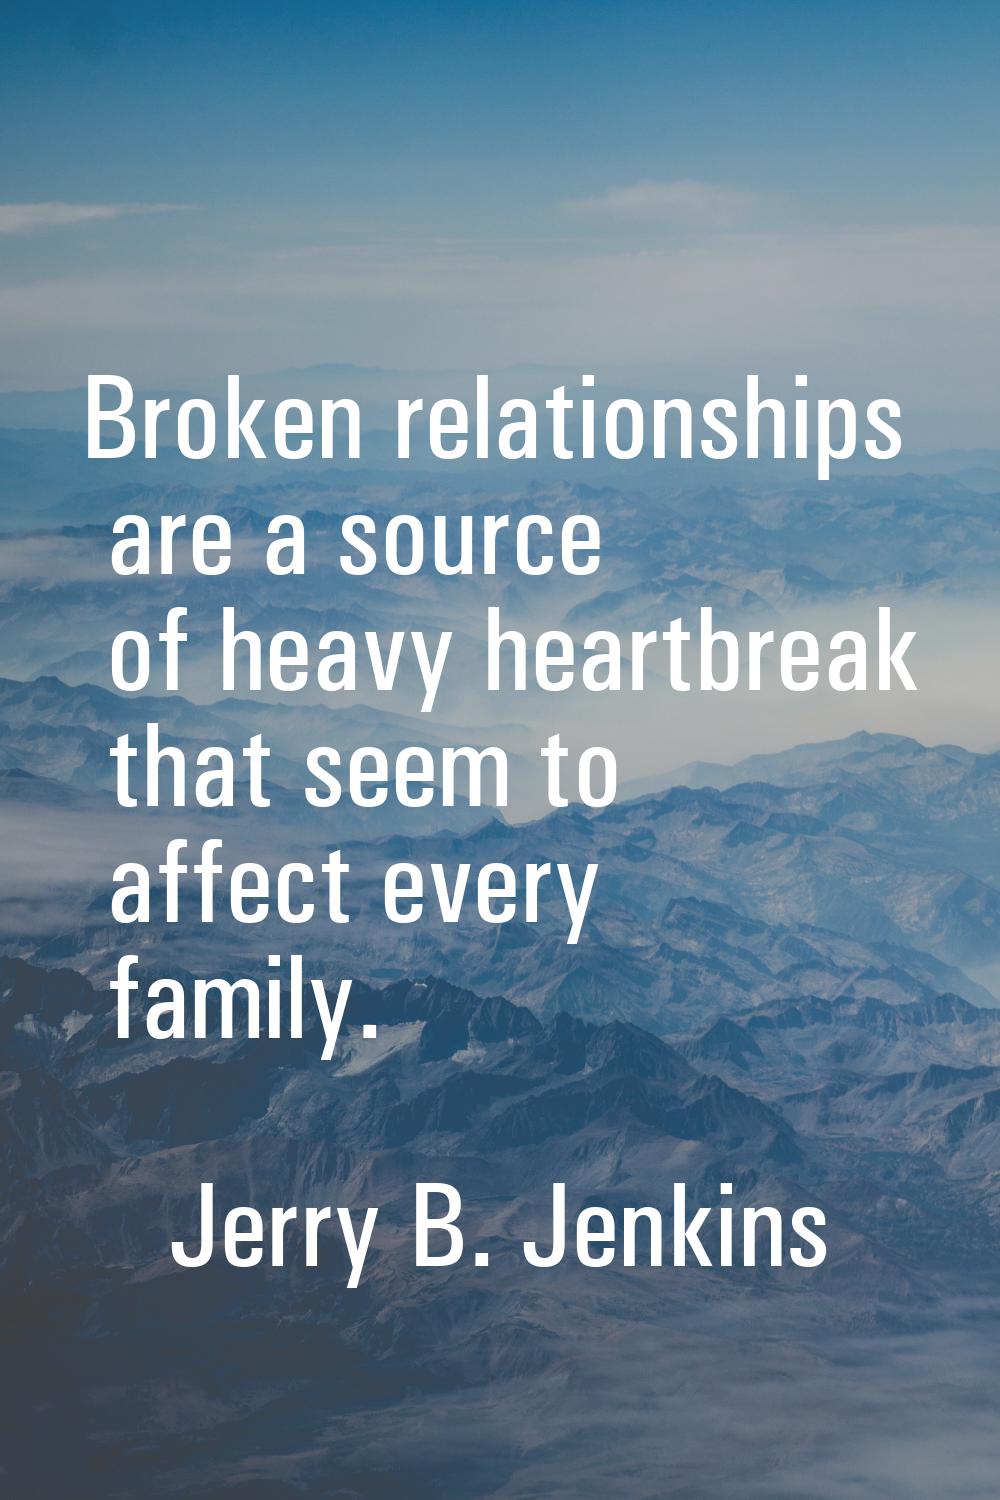 Broken relationships are a source of heavy heartbreak that seem to affect every family.